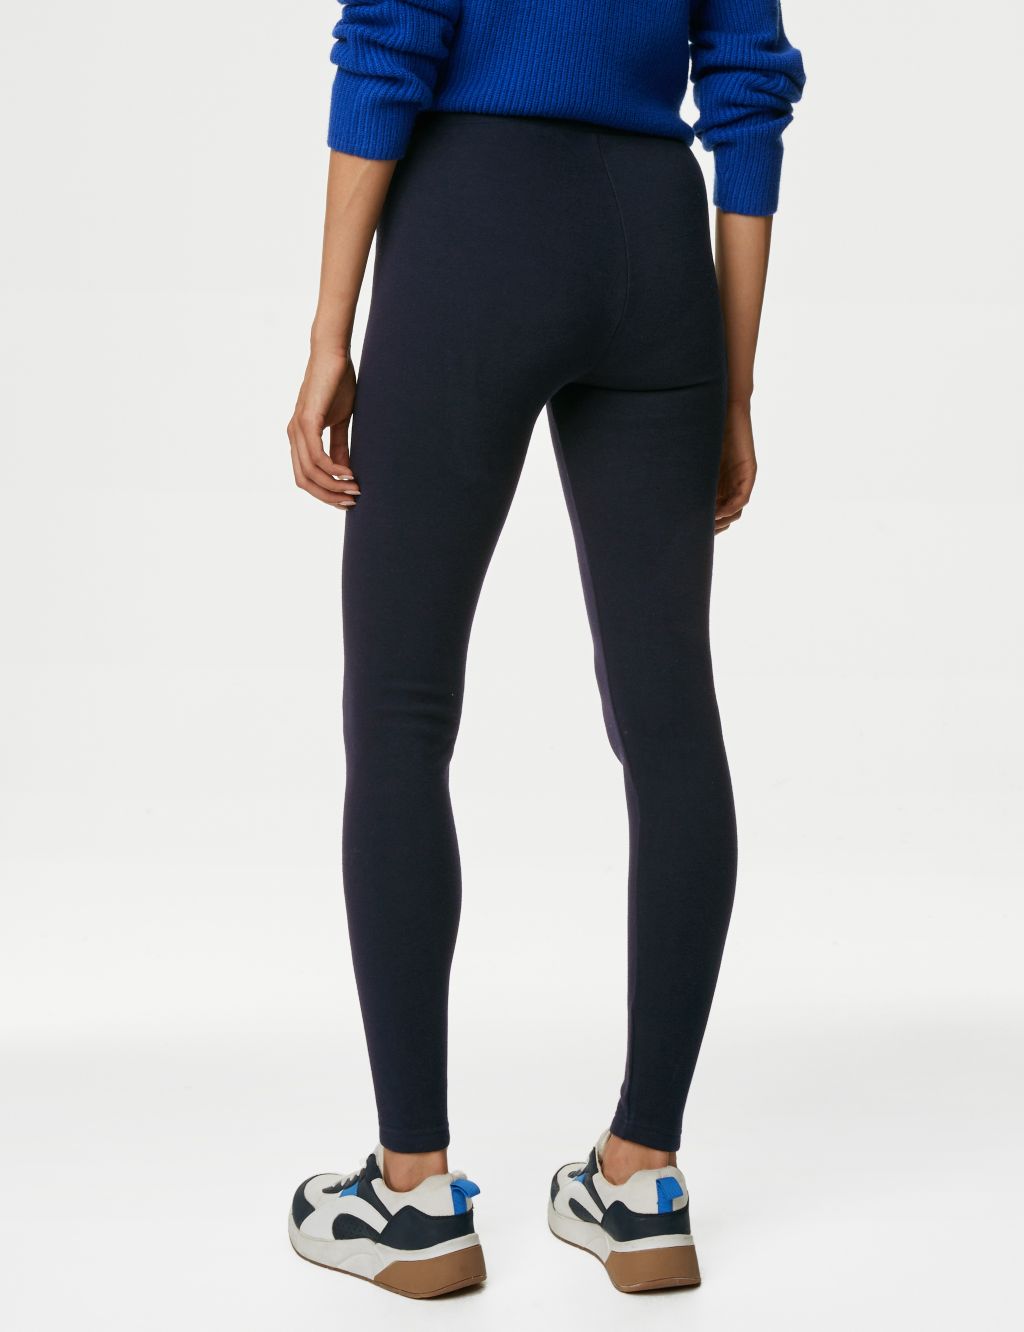 Thermal High Waisted Leggings image 5